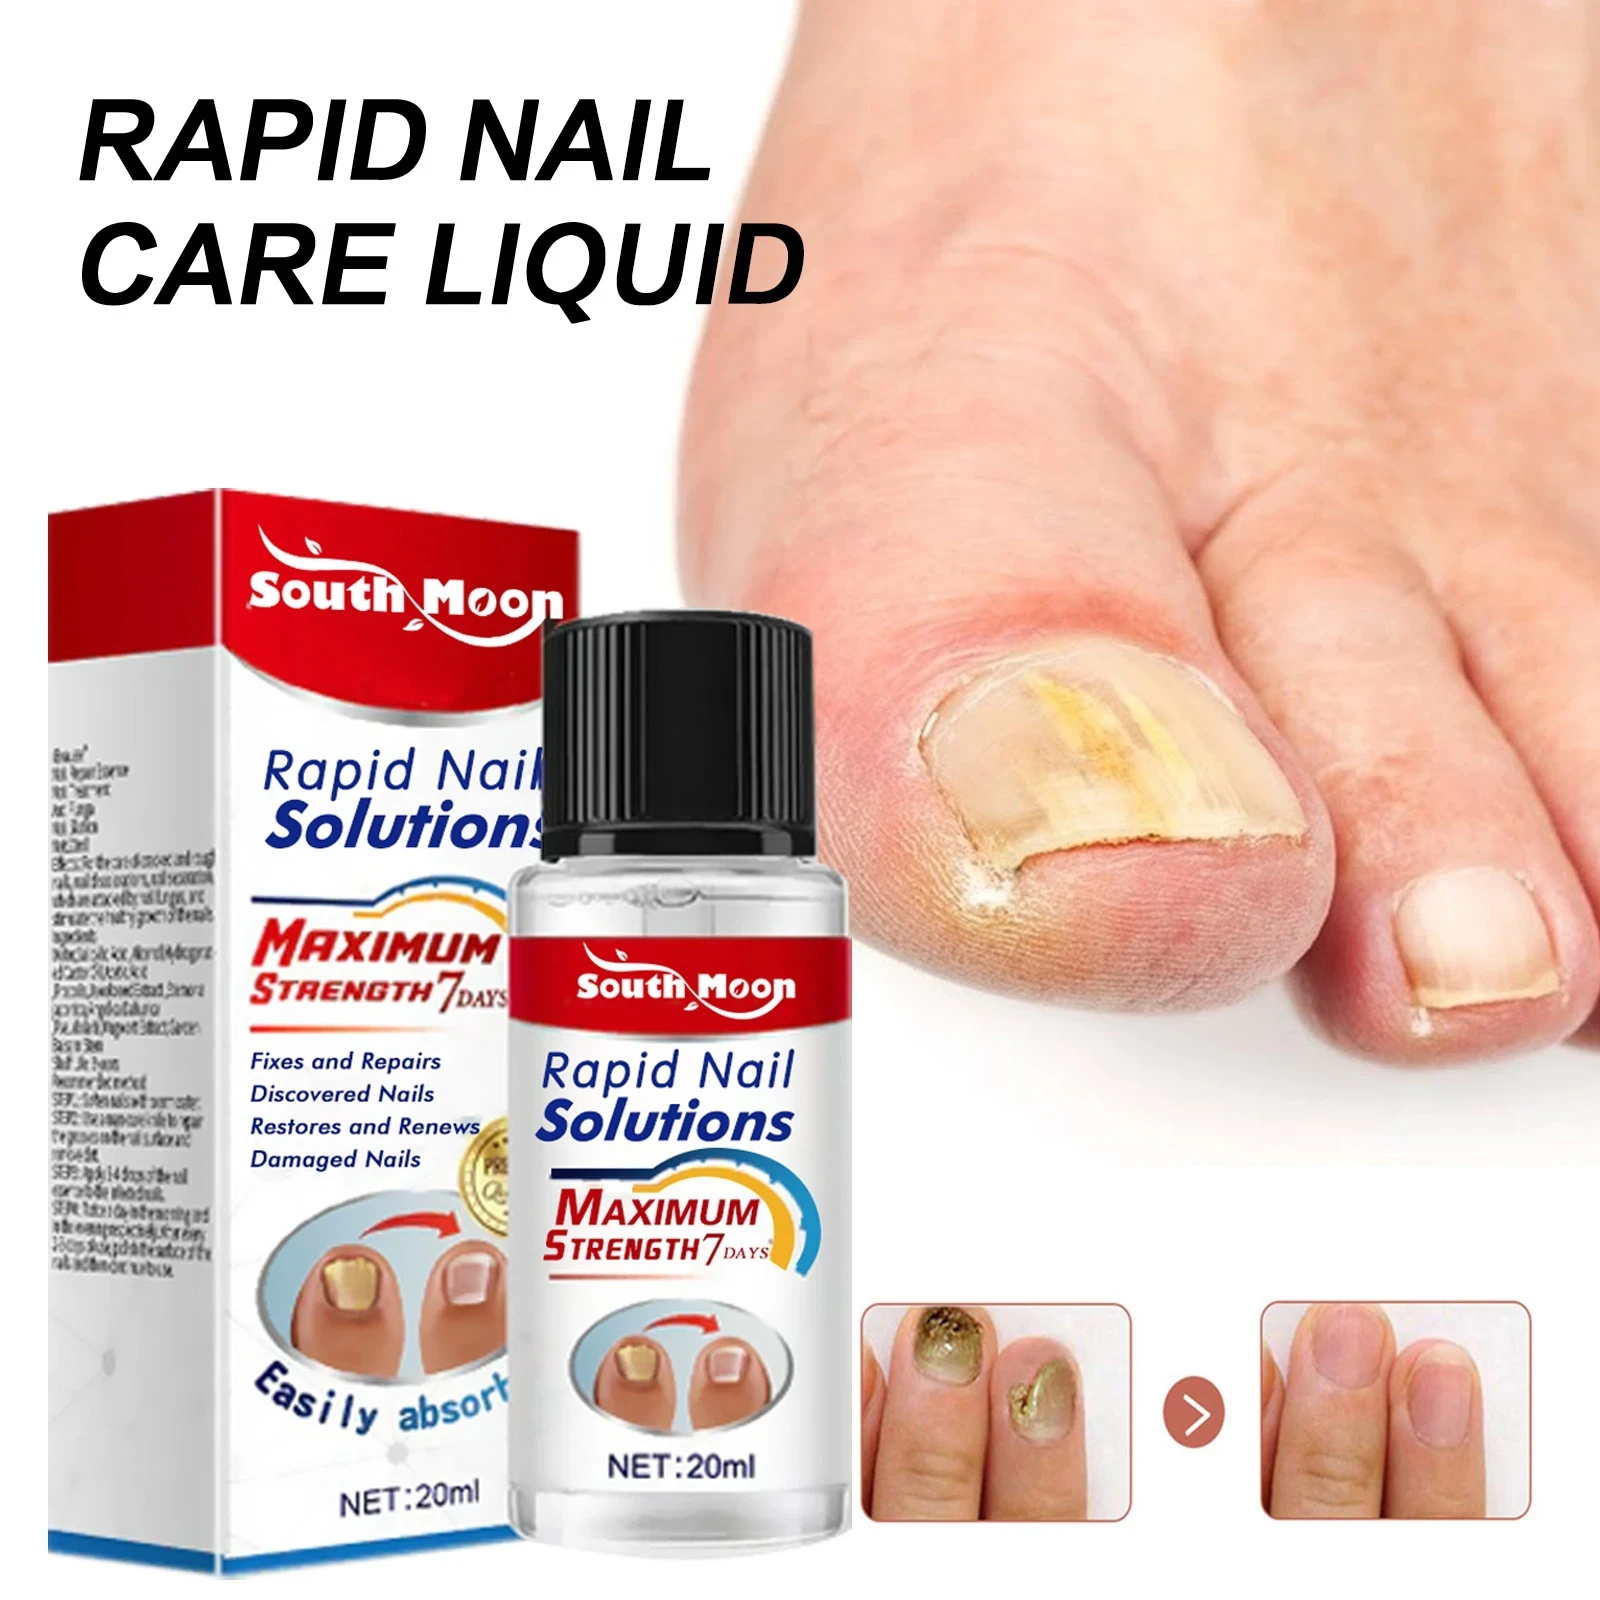 Nail Fungal Treatment Serum Anti Infection Onychomycosis Paronychia Rapid Repair Gel Toe Nail Fungal Fast Removal Hand Foot Care 1pc instantly eye bag removal eye cream long lasting wrinkles lines puffiness serum dark remover care fine effect eyes circle